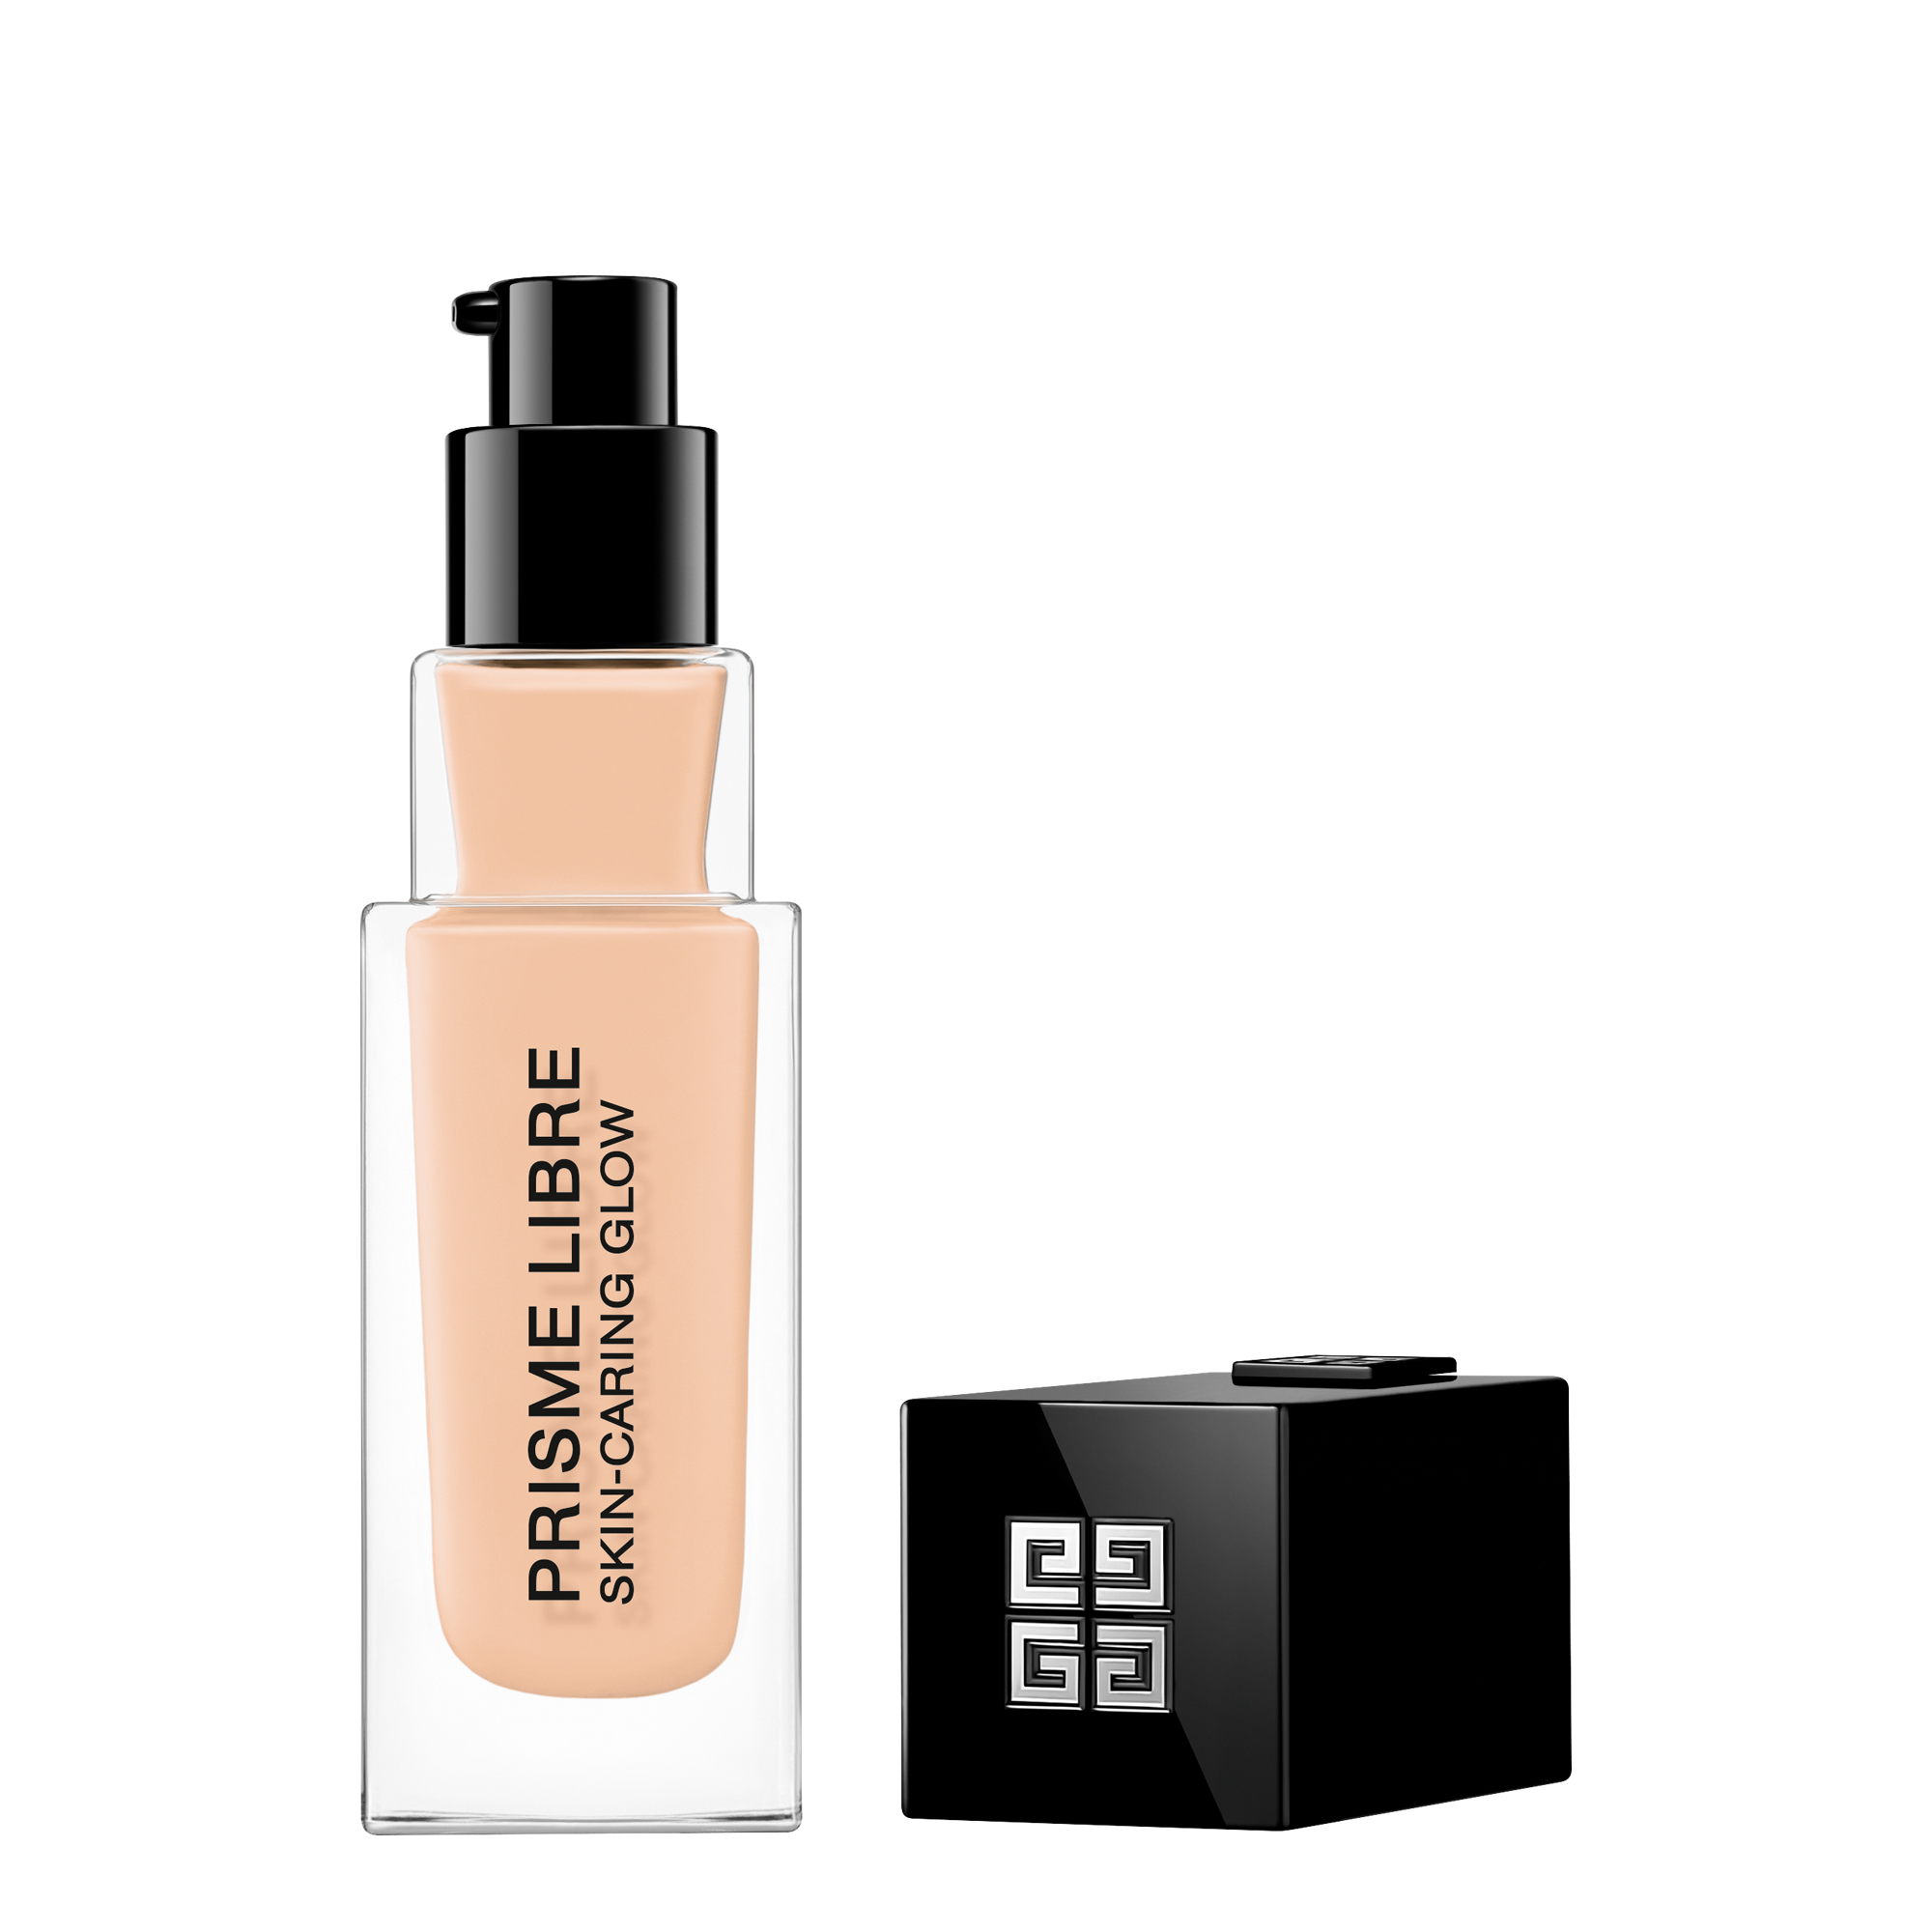 PRISME LIBRE SKIN-CARING GLOW HYDRATING FOUNDATION • Lightweight finish  foundation combined with hydrating skincare ∷ GIVENCHY